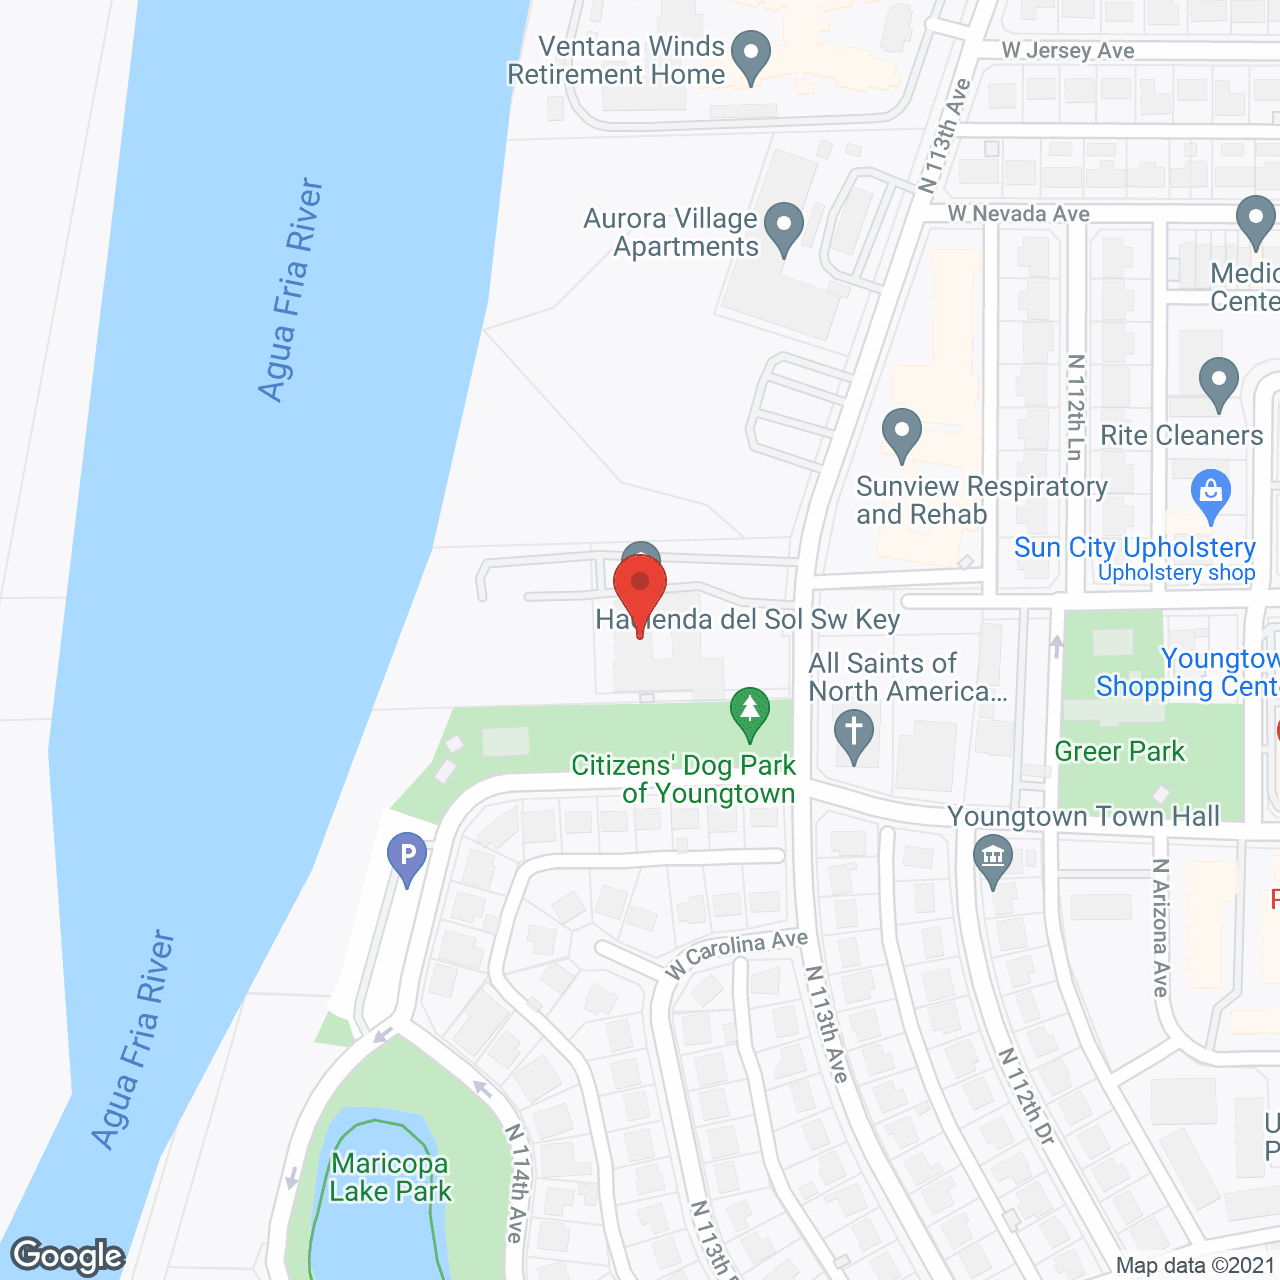 Fountain Retirement Hotel in google map